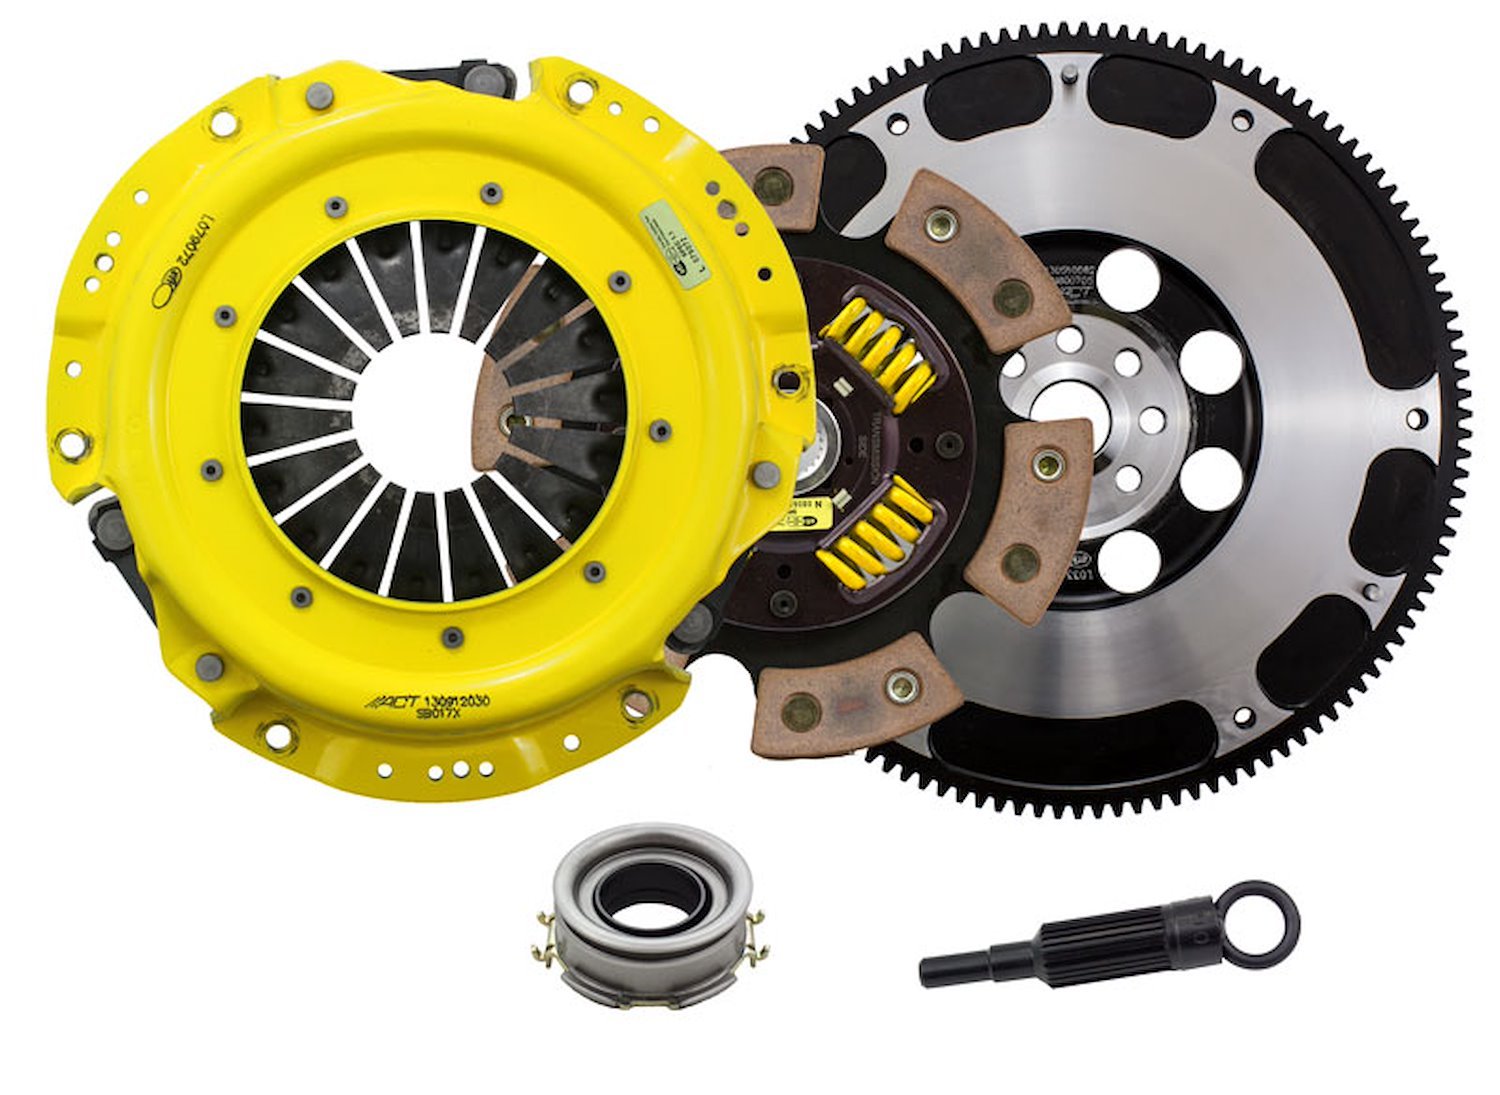 XT/Race Sprung 6-Pad Transmission Clutch Kit Fits Select Multiple Makes/Models